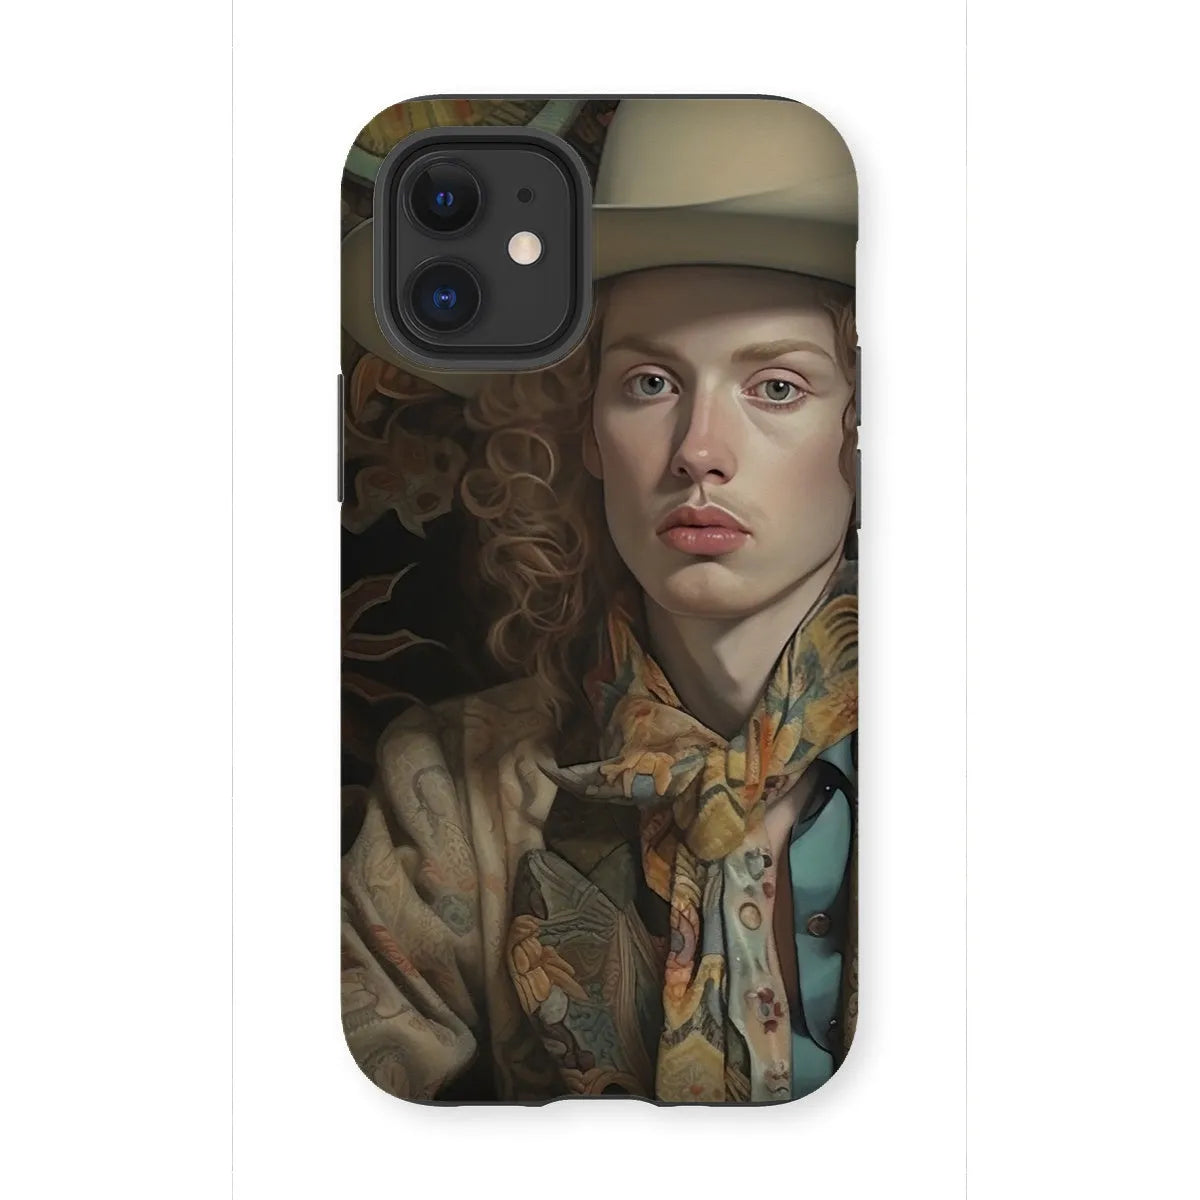 Ollie The Transgender Cowboy - F2m Dandy Outlaw Phone Case - Iphone 12 Mini / Matte - Mobile Phone Cases - Aesthetic Art